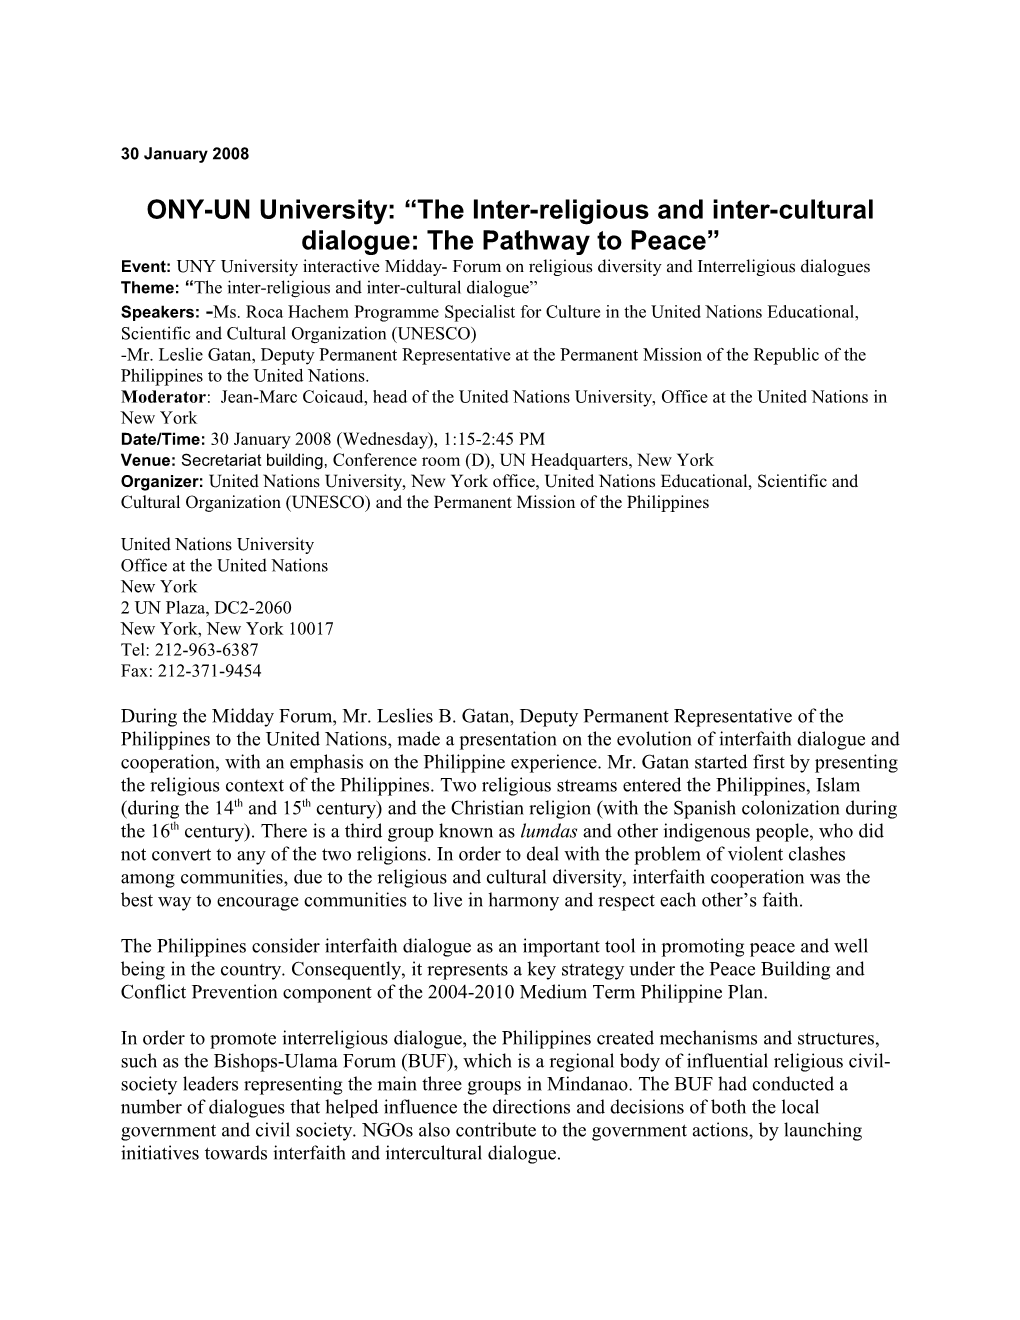 ONY-UN University: the Inter-Religious and Inter-Cultural Dialogue: the Pathway to Peace